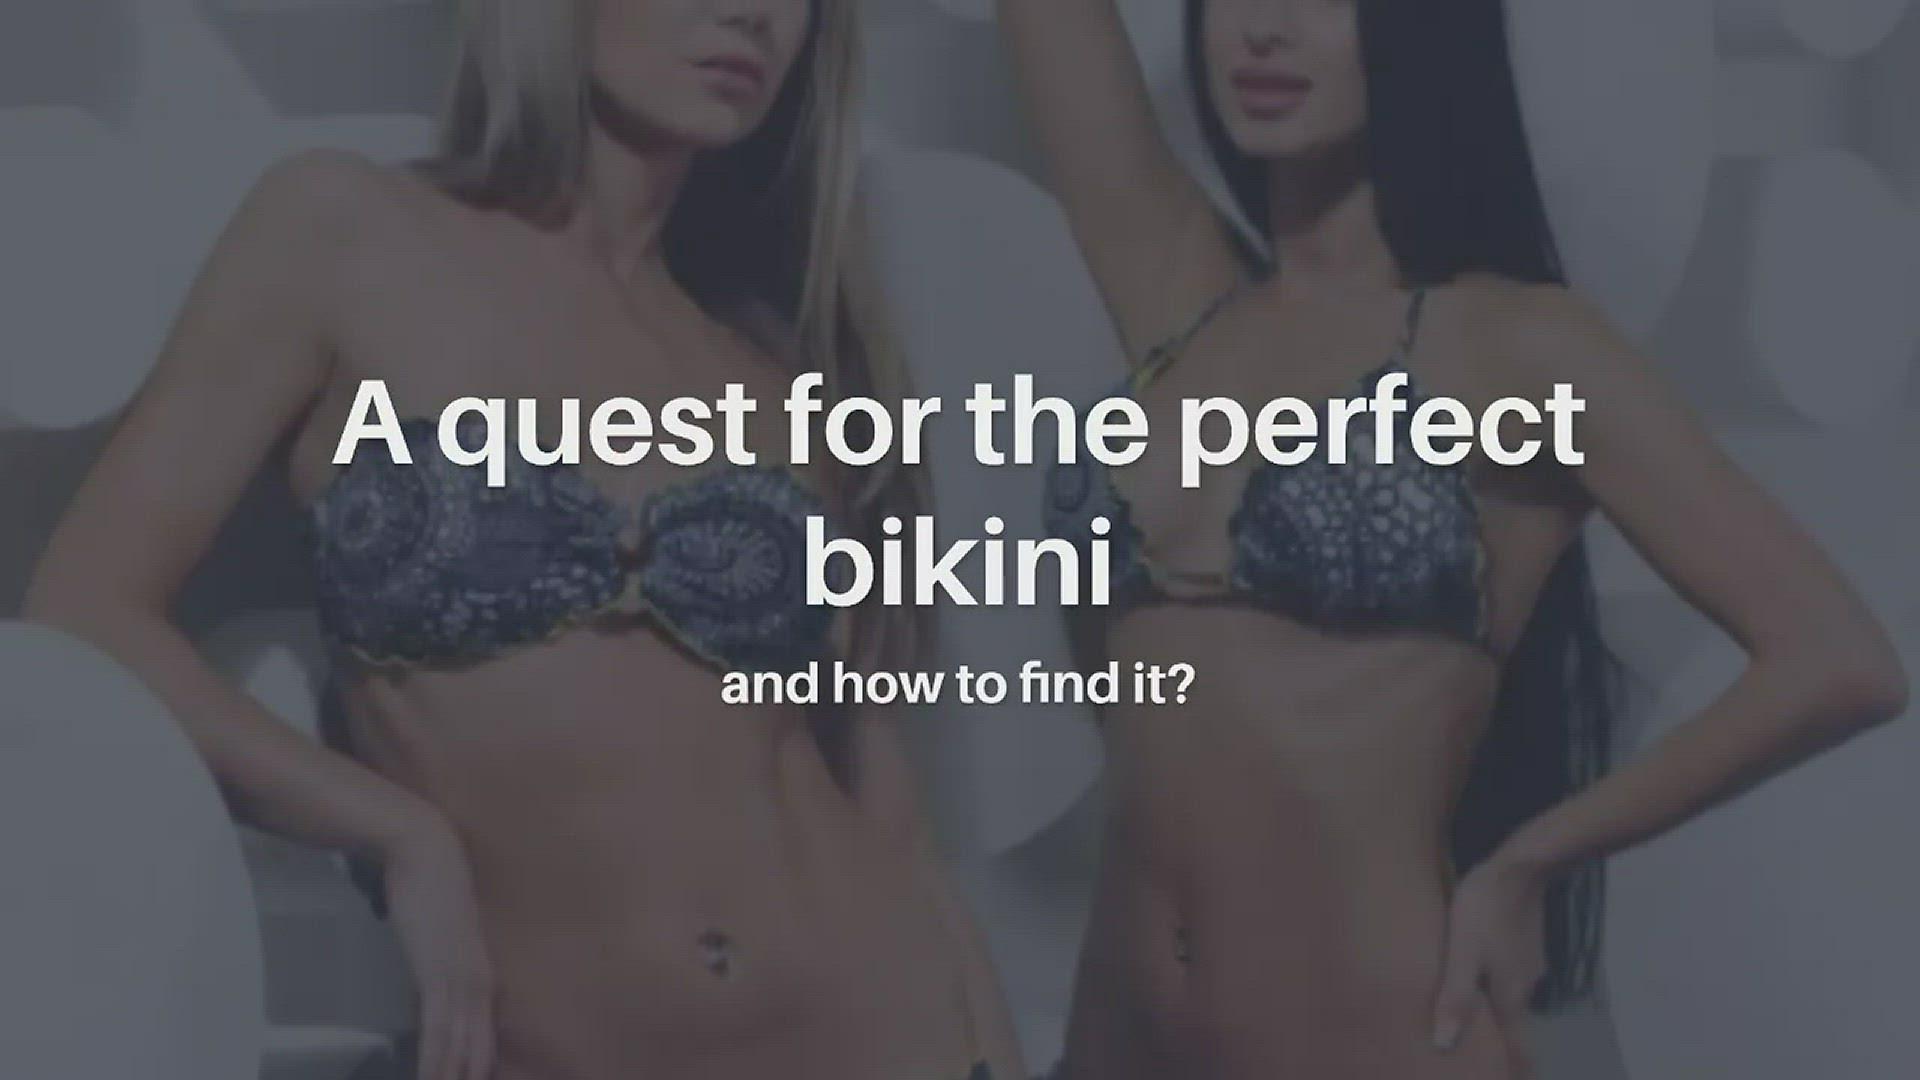 'Video thumbnail for A quest for the perfect bikini and how to find it?'